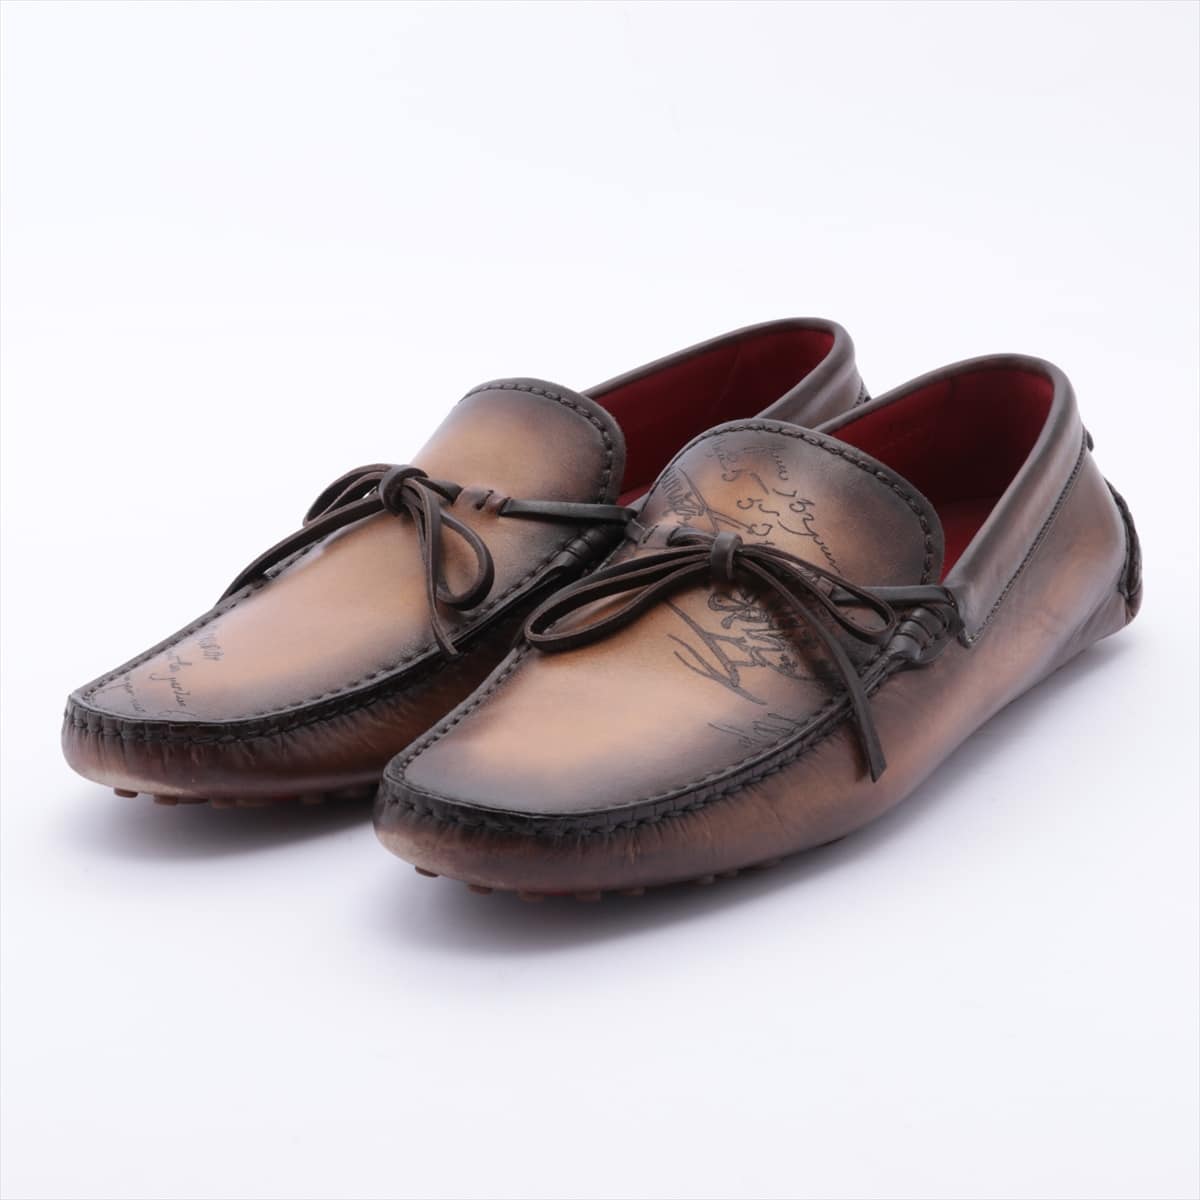 Berluti Calligraphy Leather Driving shoes 8 Men's Brown